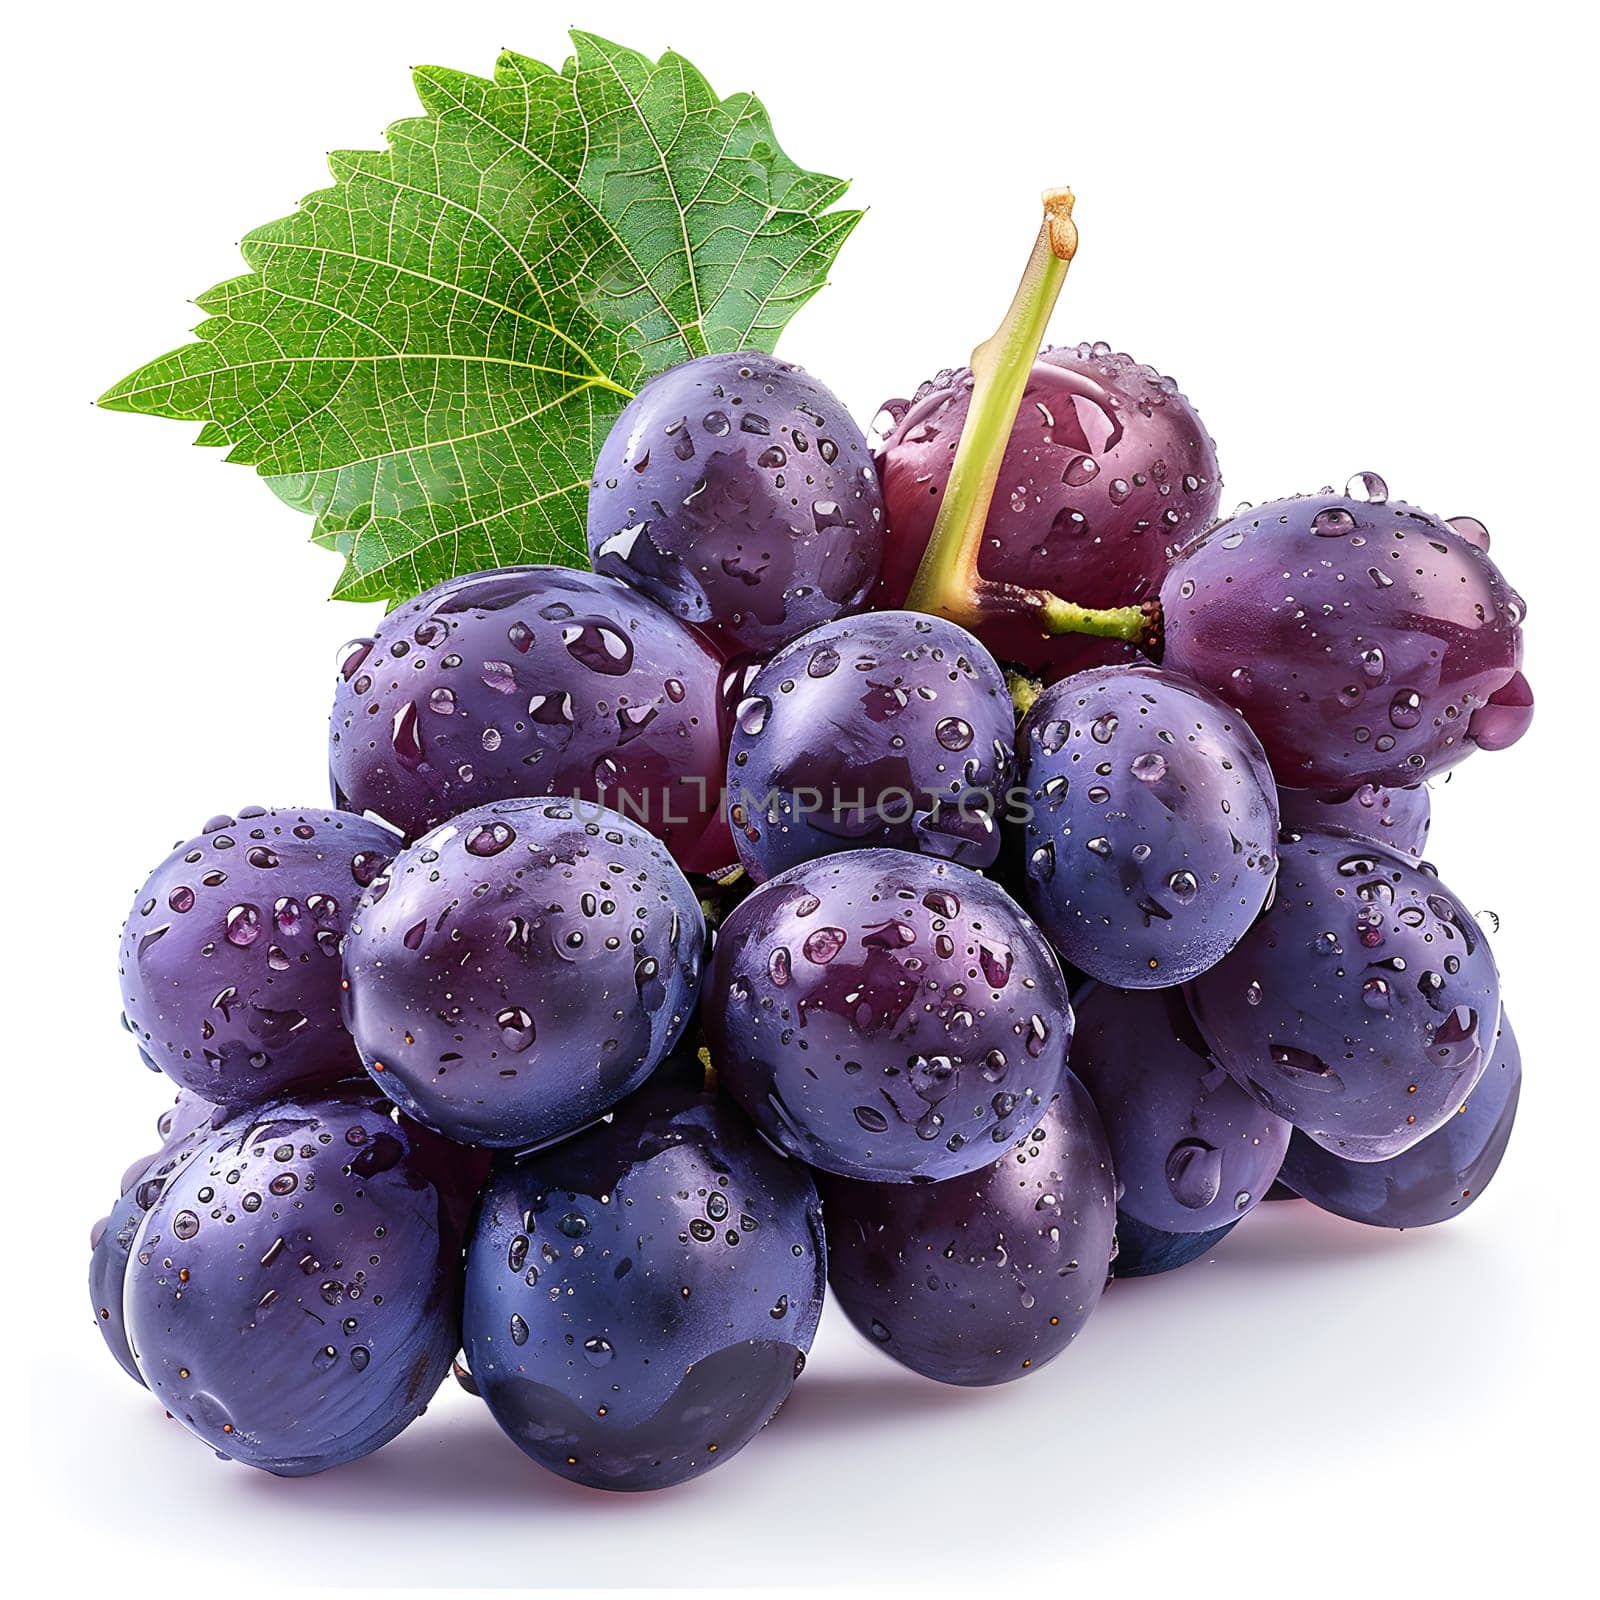 A bunch of purple grapes, a seedless fruit, on a white background by Nadtochiy